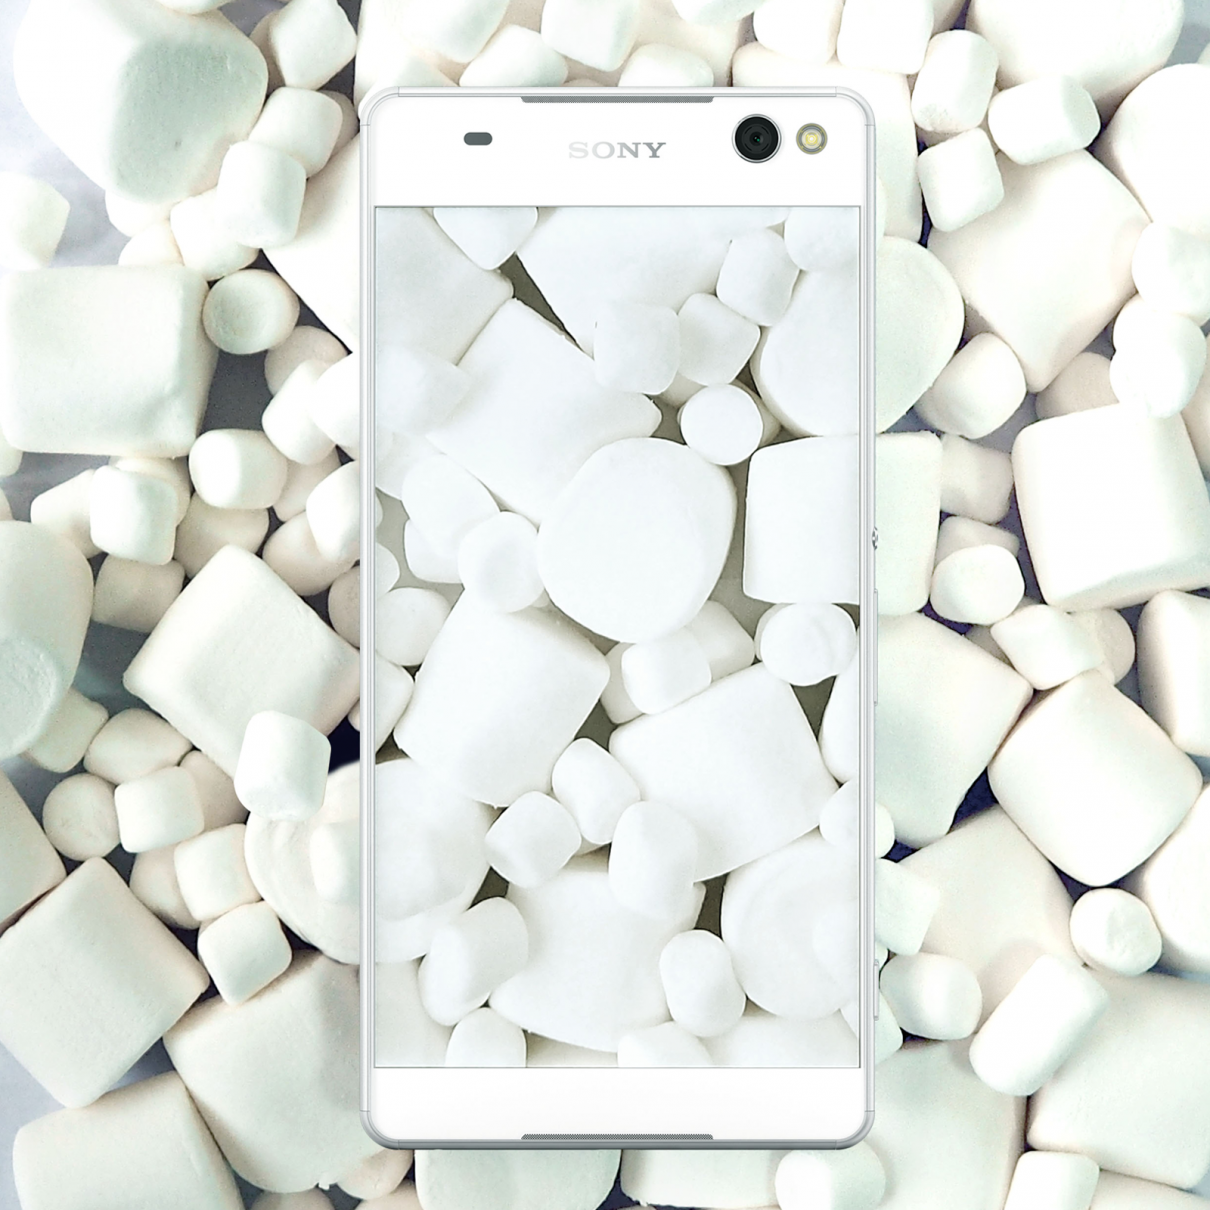 Sony Android 6.0 Masrhmallow